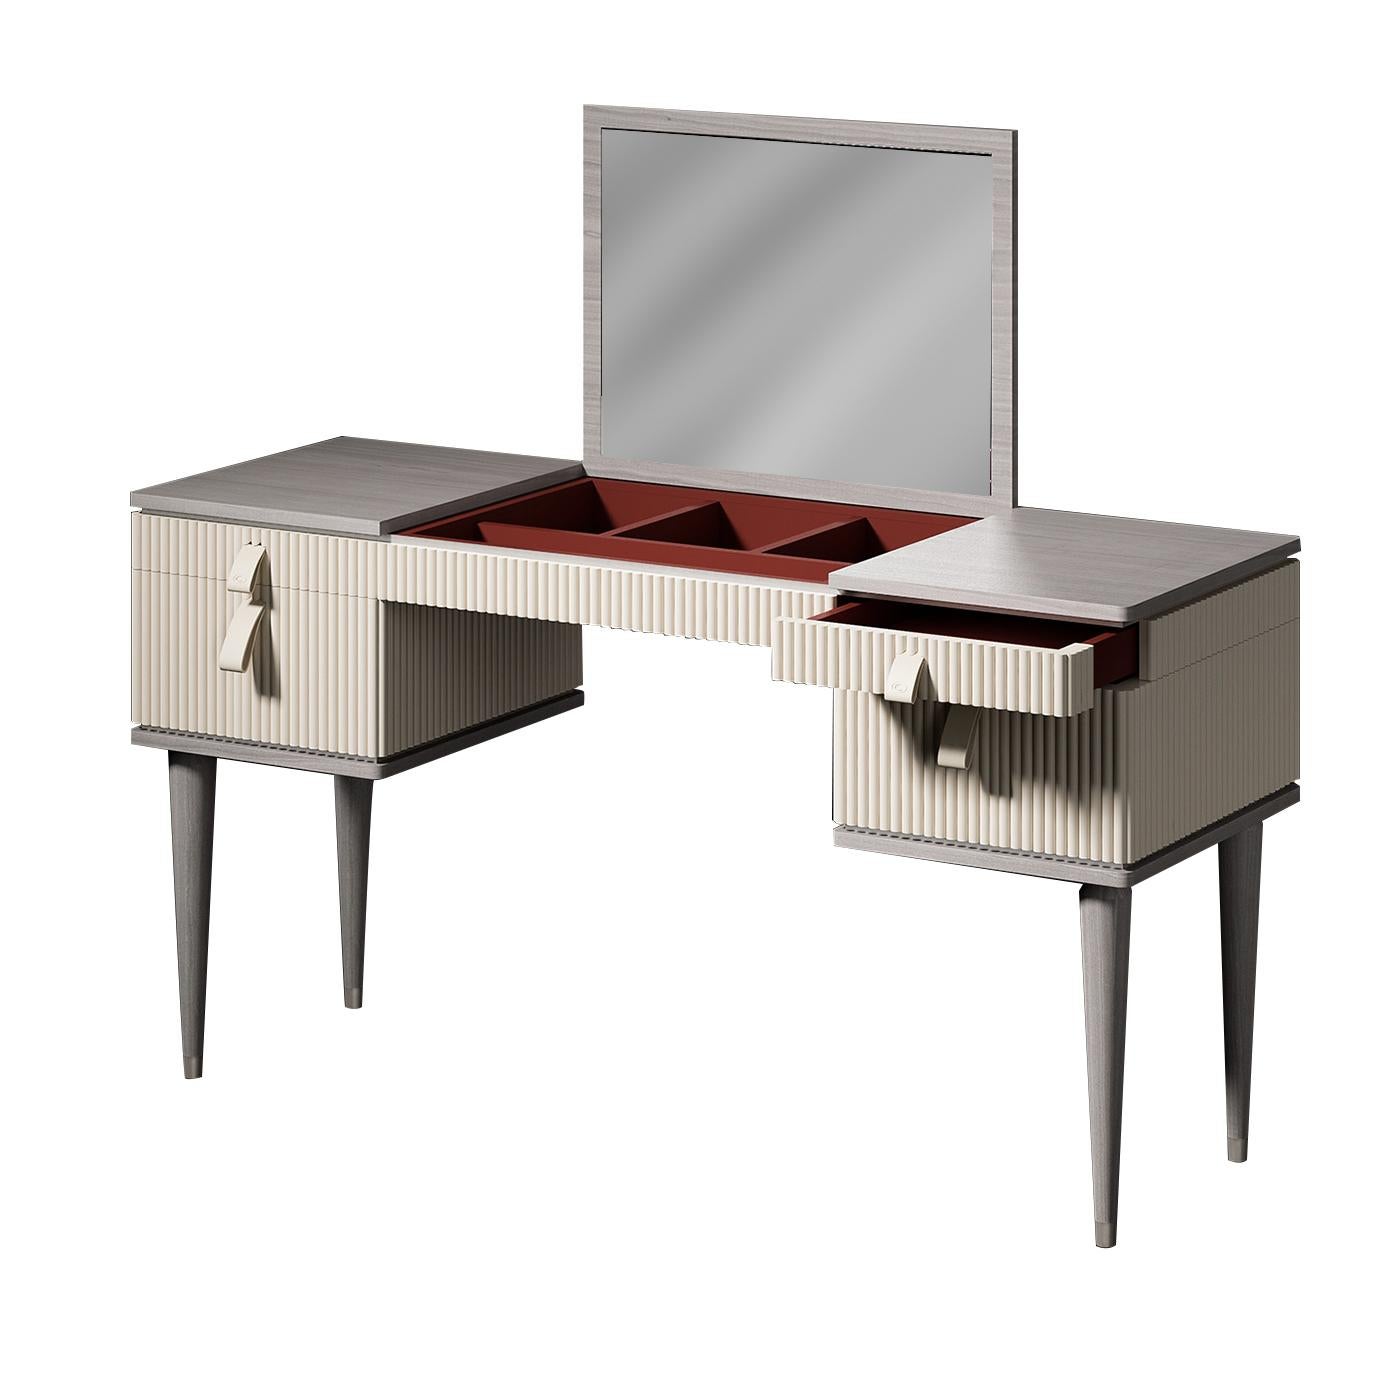 Functional yet chic, this striking vanity table is the perfect bedroom accessory for the modern woman. Made entirely of wood, the tapered legs, base, and top have a modern grey finish, while the drawer units of beige lacquered wood boast a